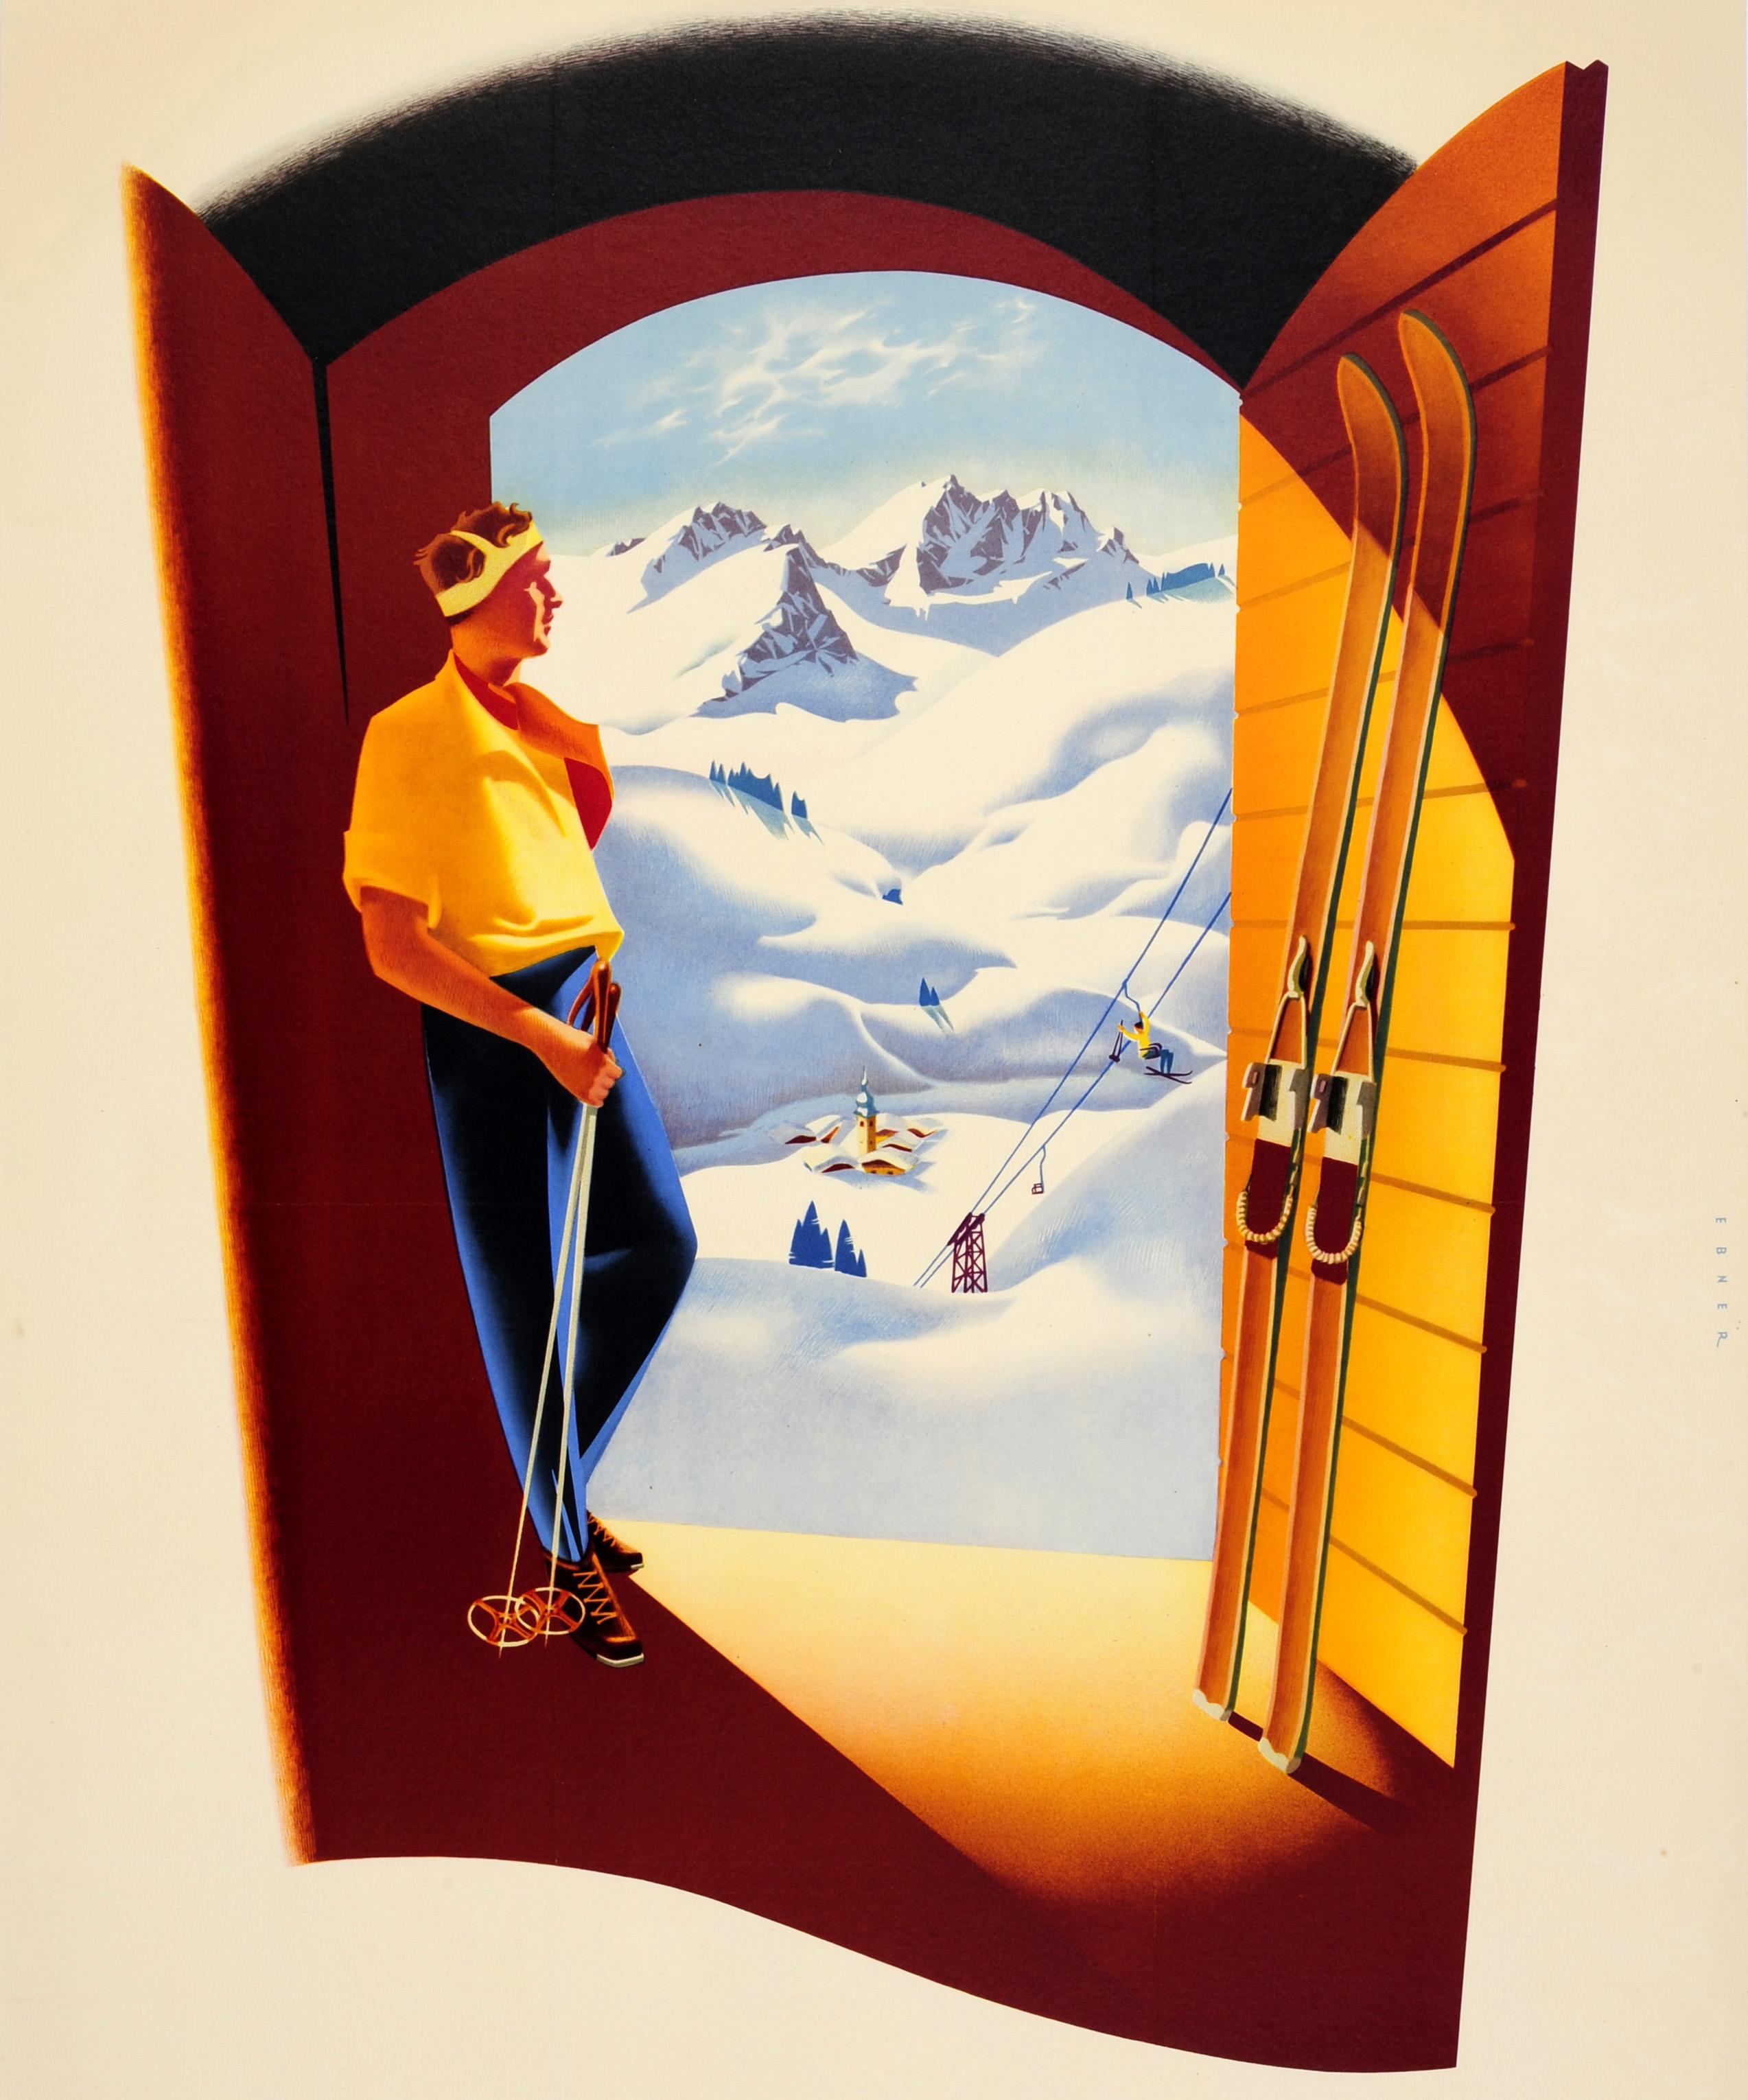 Original vintage travel and winter sports poster for Austria / Osterreich featuring a great image of a skier leaning against a doorway holding his ski poles with his skis against the door, looking out at the snowy slopes and a ski lift with mountain